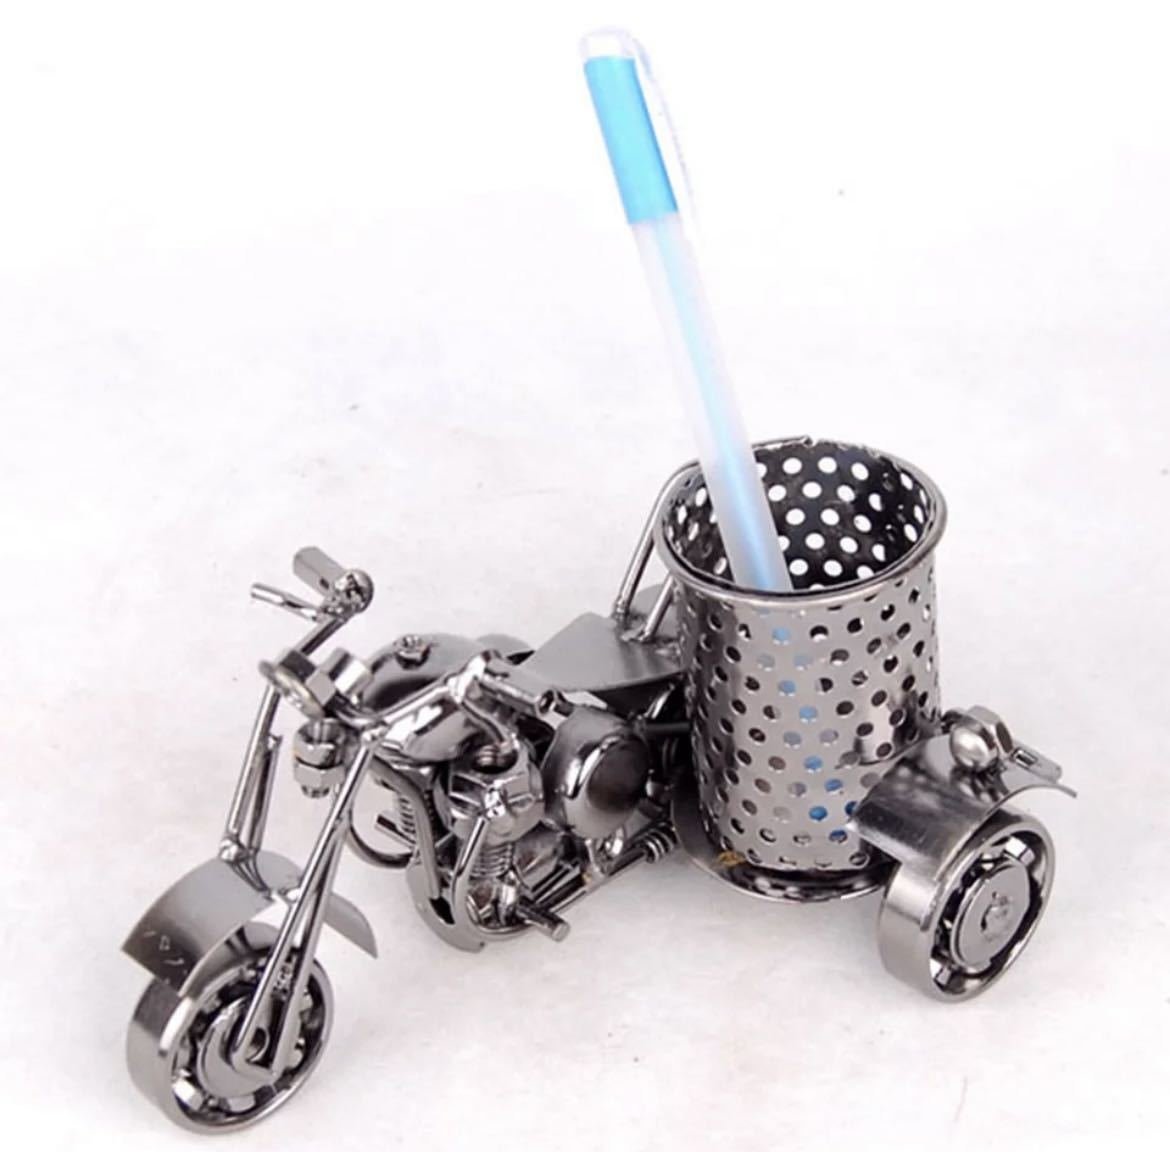 LHH602★2 types in total, 1 type selected Vintage Motorcycle Retro Miscellaneous Goods Motorcycle Pen Holder Pen Holder Interior Ornament Accessory Object Decoration, handmade works, interior, miscellaneous goods, ornament, object